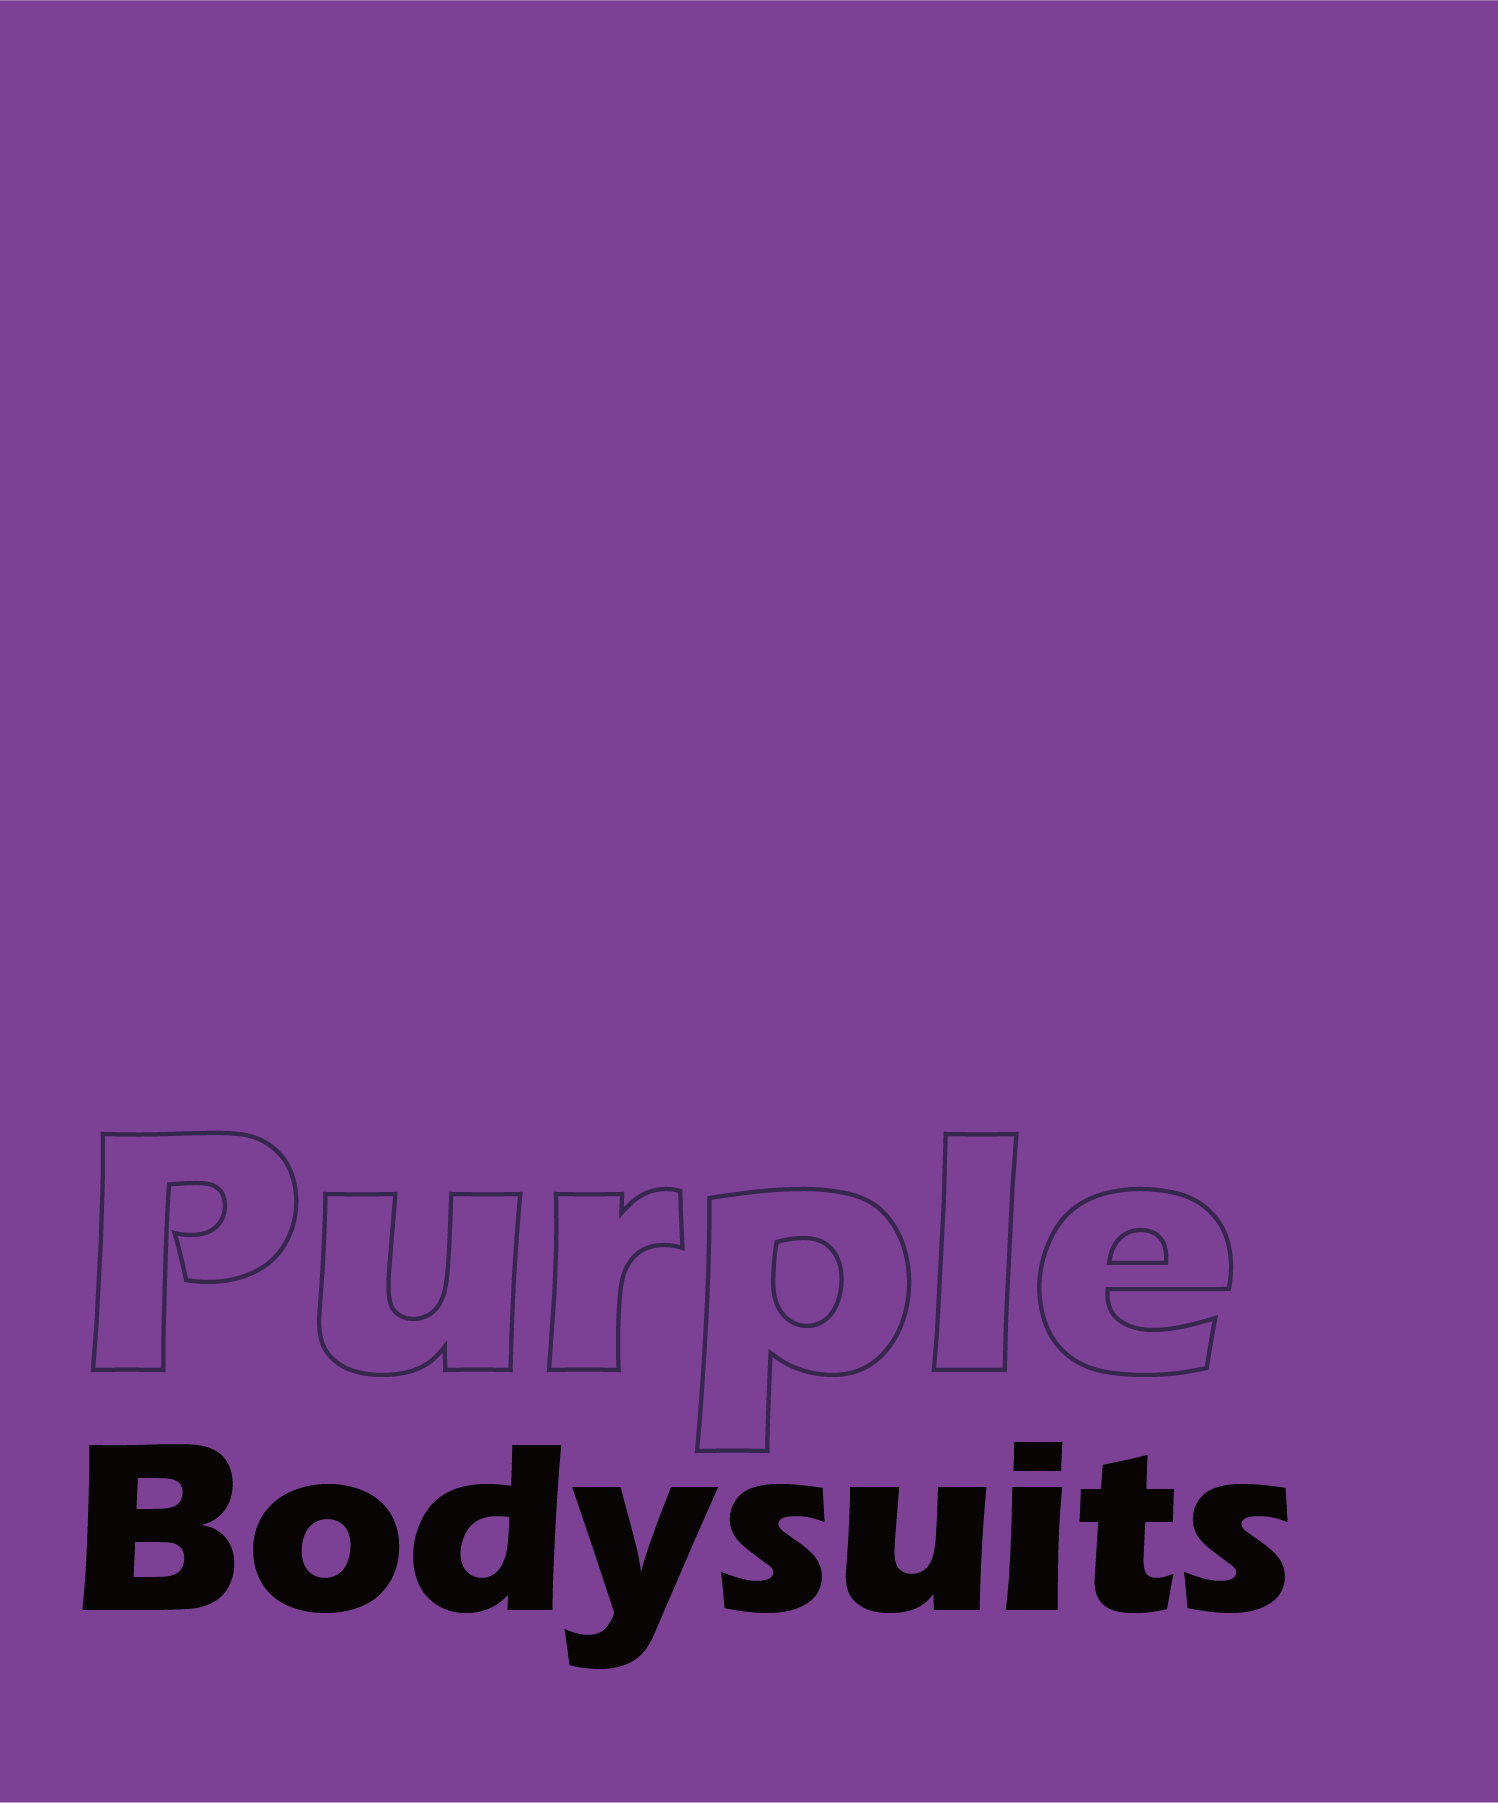 Elegant purple bodysuits made from premium fabrics, offering a flattering fit and sophisticated style.